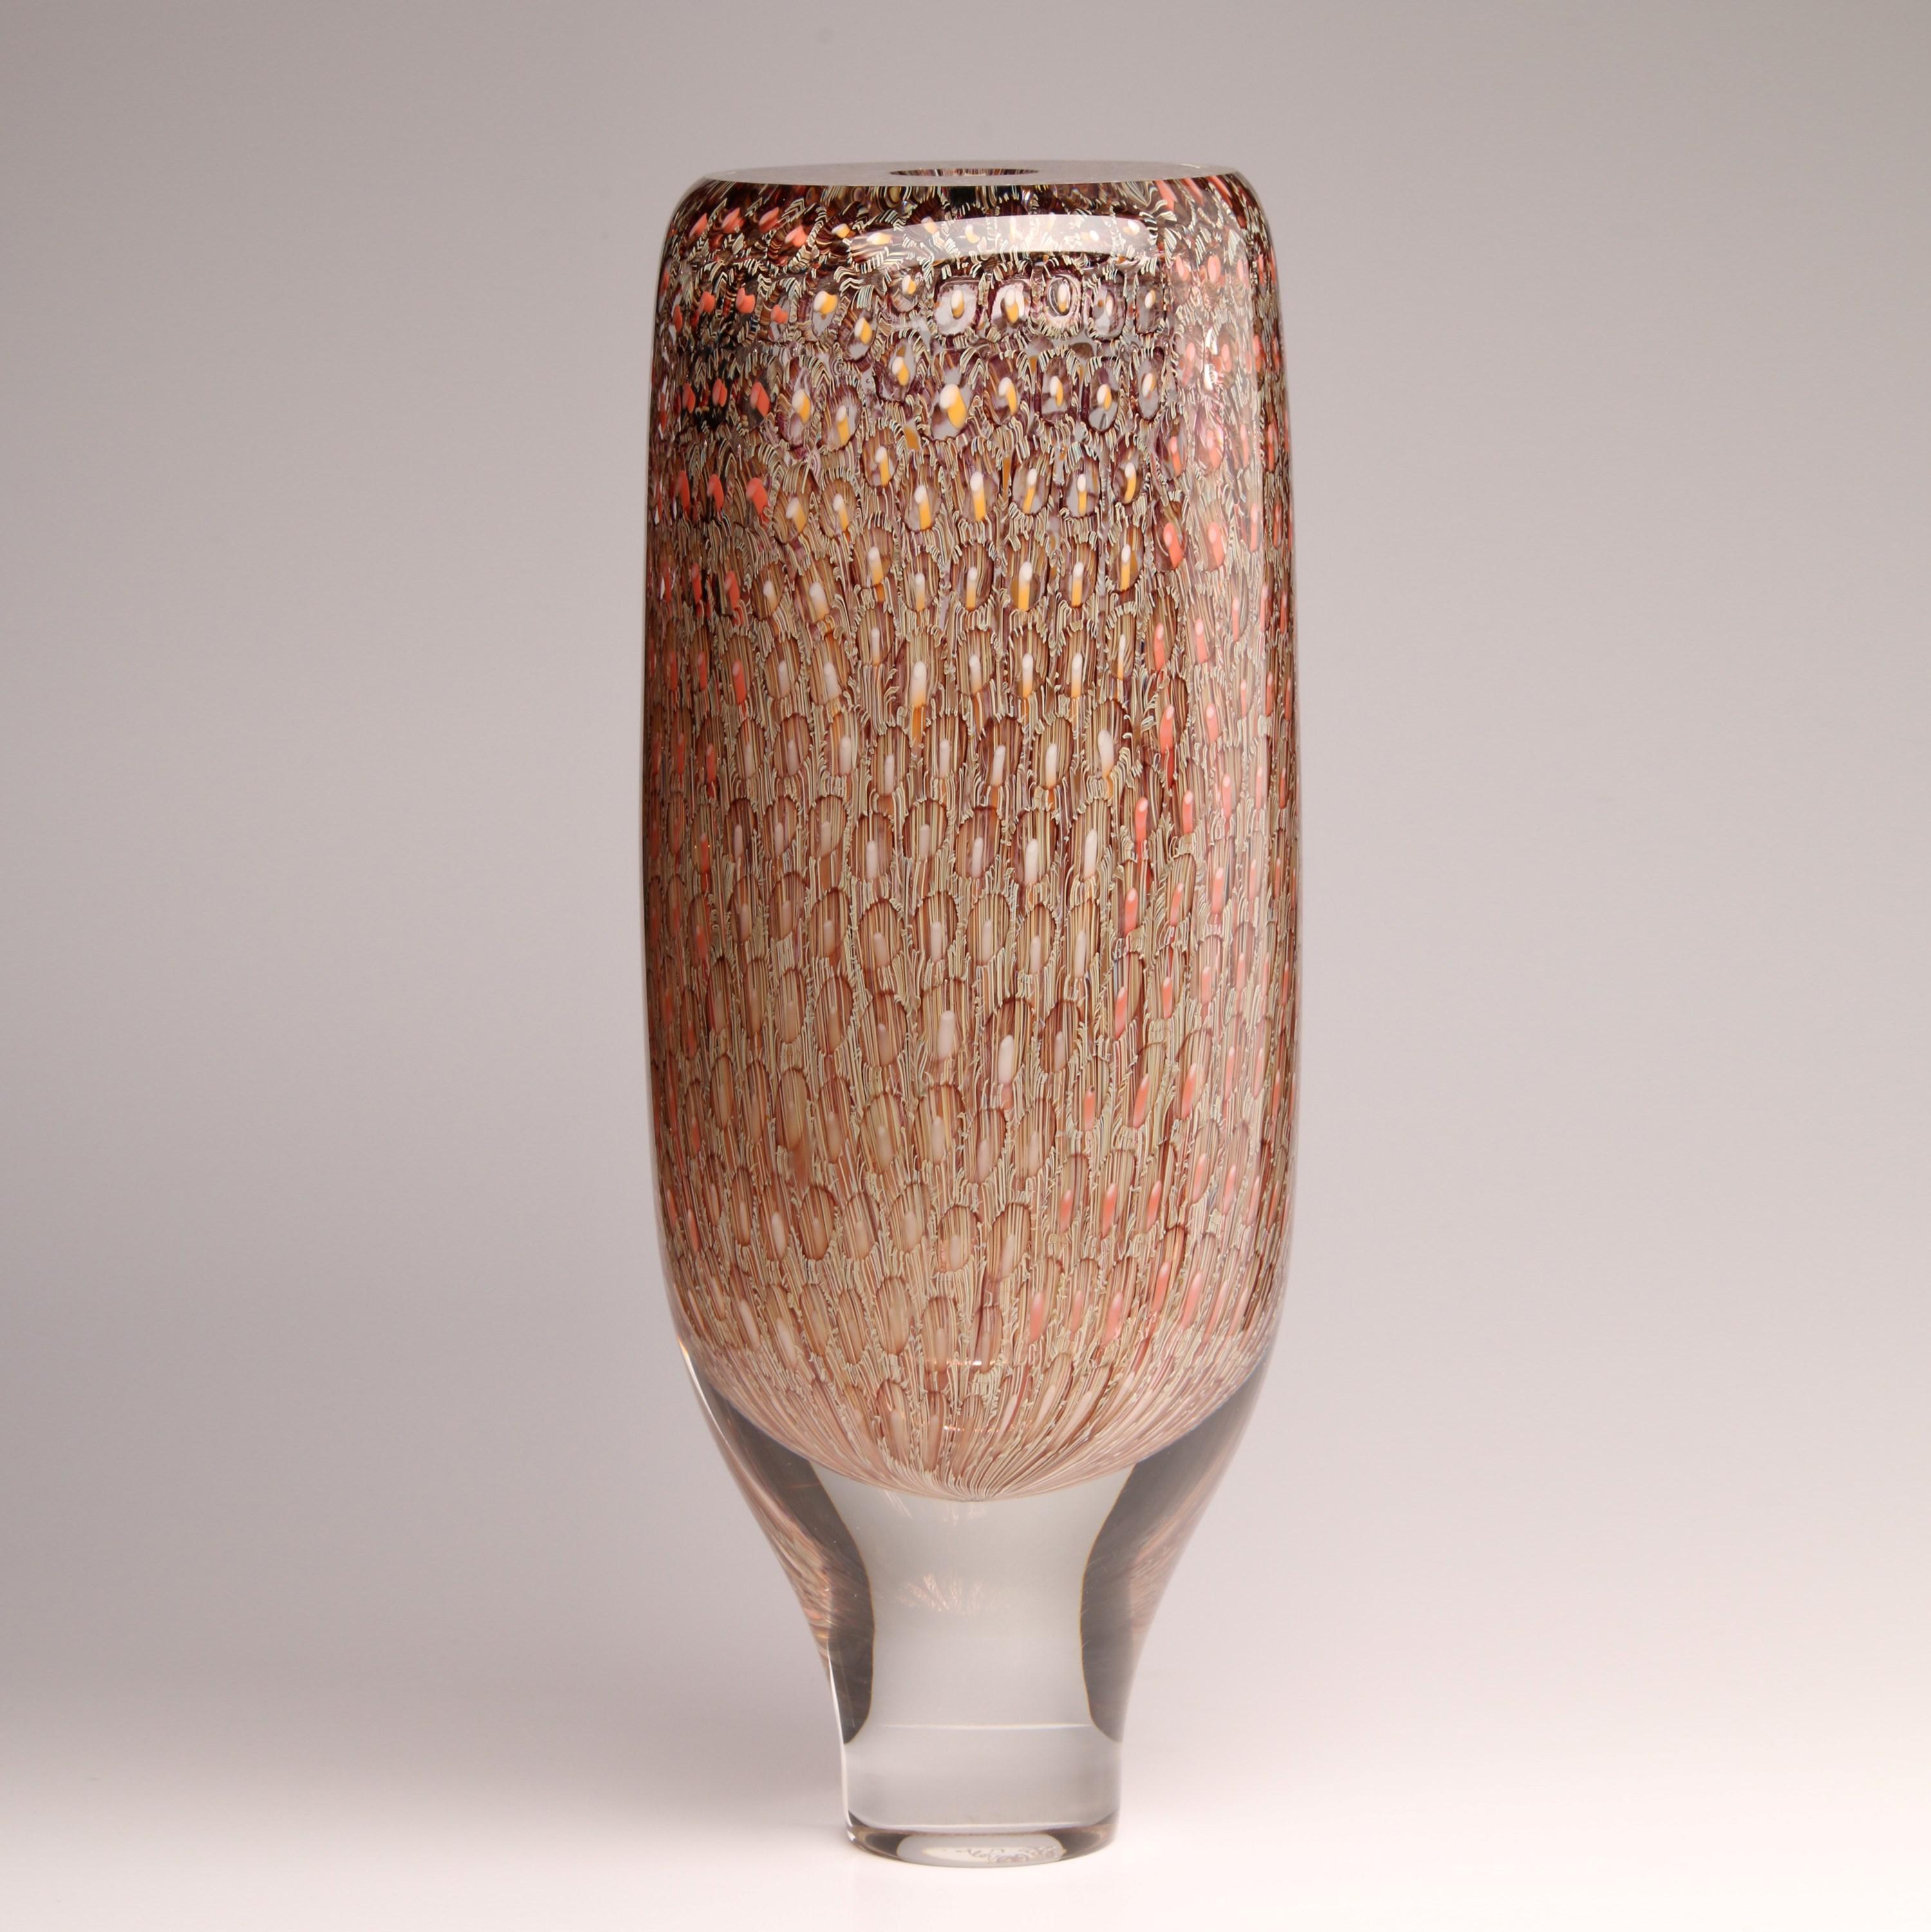 Hand-Crafted Murrine Quadrants Tall Form in Salmon & Primrose, glass vessel by Peter Bowles